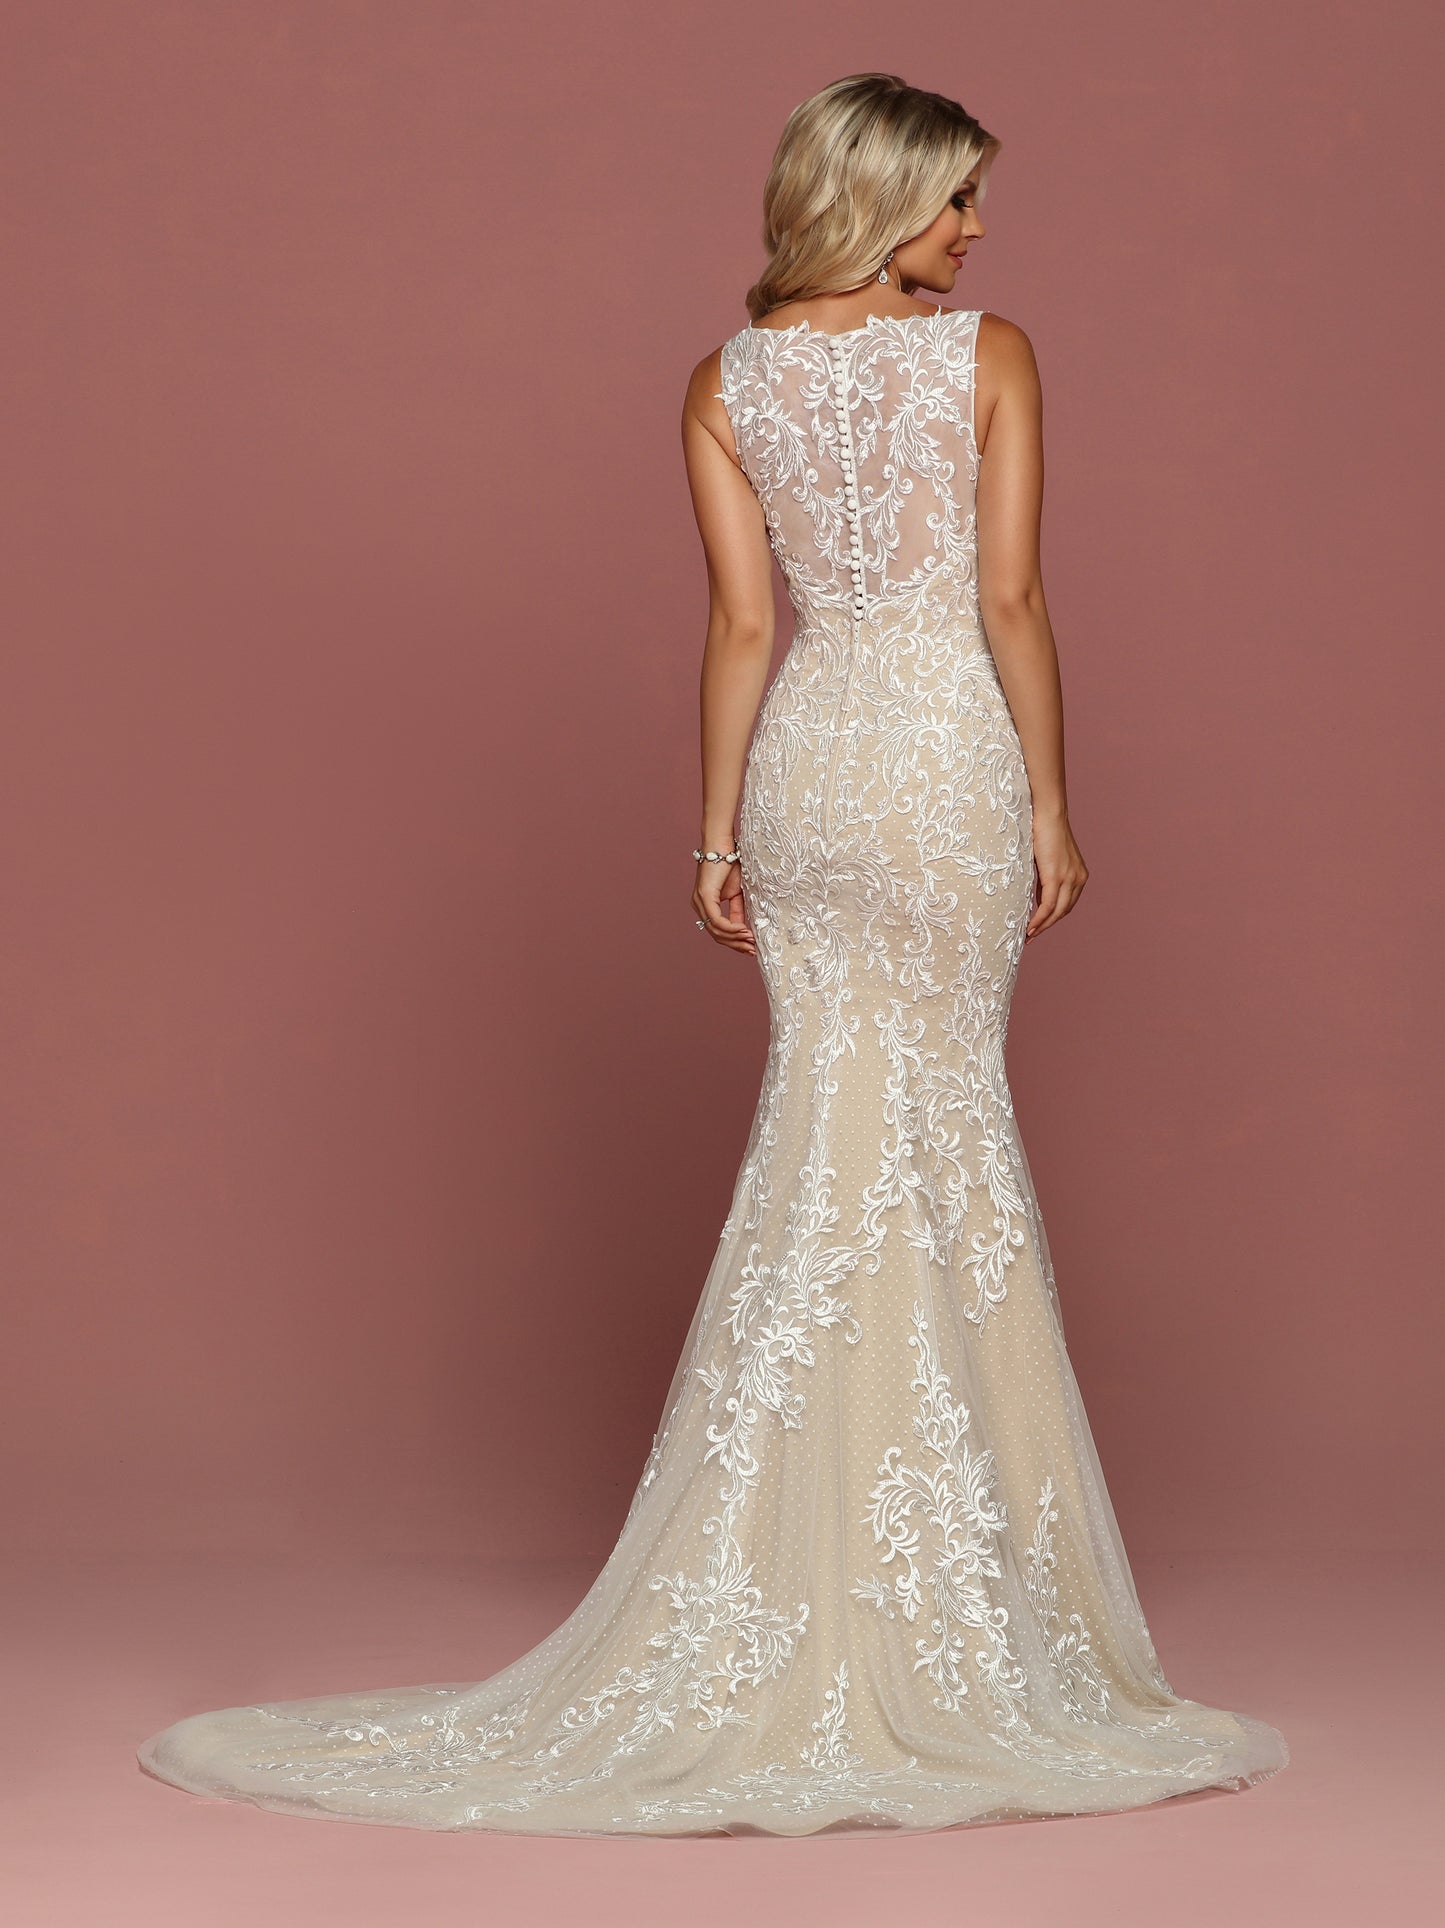 Davinci Bridal 50486 is a Fitted Mermaid Silhouette wedding dress. Featuring Point D' Esprit & Tulle. This Gown Has a V Neckline with Sheer lace straps leading to a sheer Illusion Lace back. Buttons line the back seam. Delicate lace covers this gown and cascades down into the trumpet skirt and train.  Available for 1-2 Week Delivery!!!  Available Sizes: 2,4,6,8,10,12,14,16,18,20  Available Colors: Ivory/Nude, Ivory/Ivory